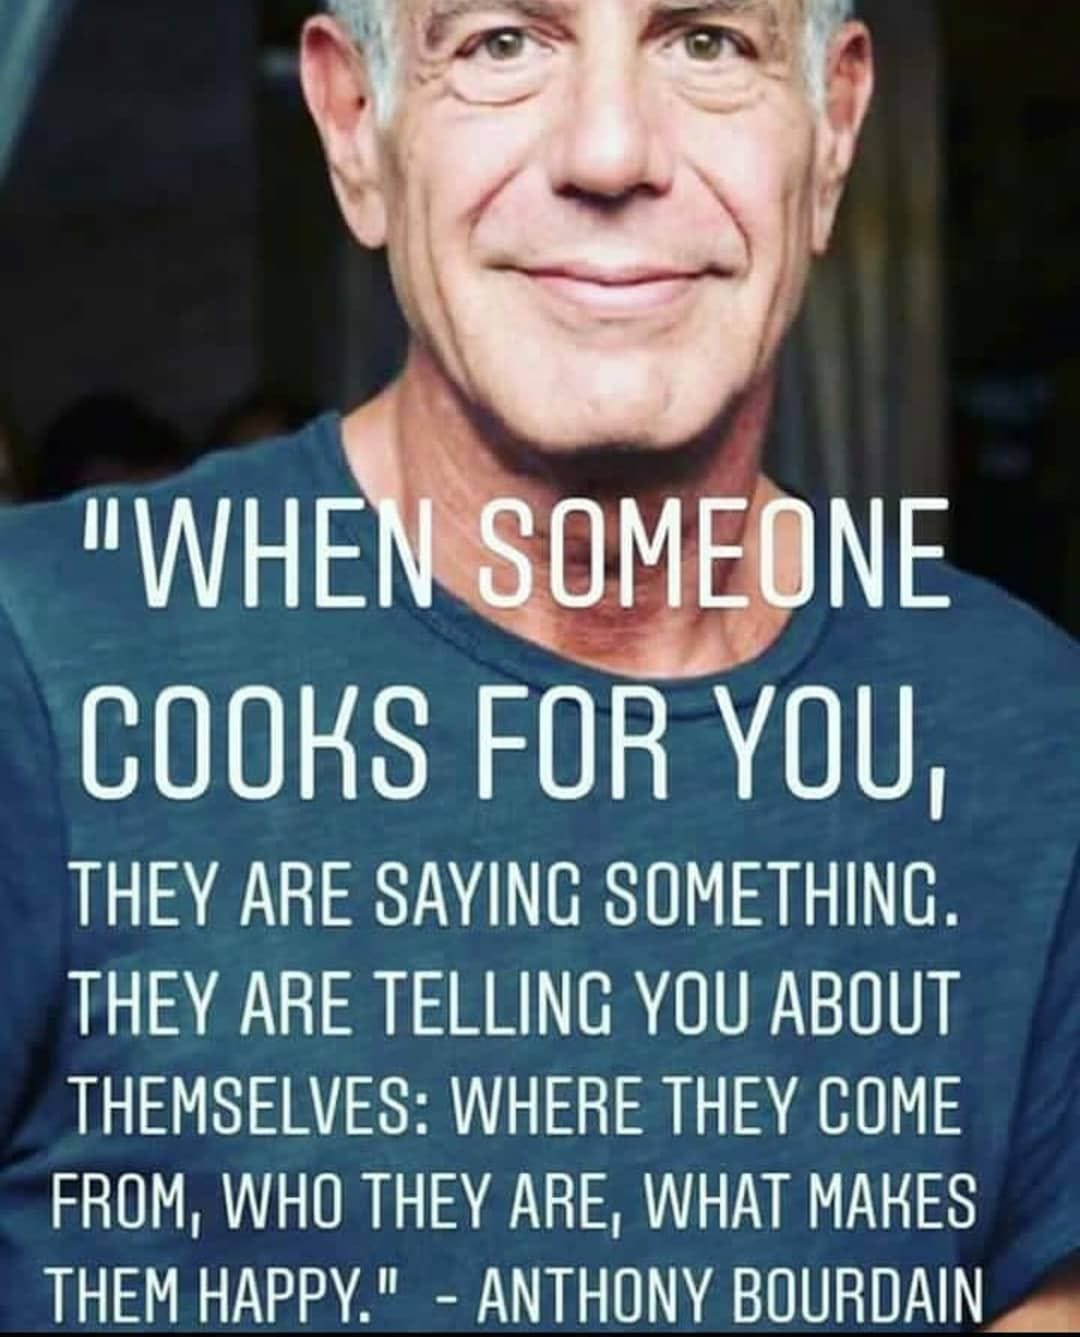 Come_chop(Everything Food) on Instagram: “Very true... Anthony Bourdain  said it all! 👏👍 Life of a chef! A… | Anthony bourdain quotes, Chef quotes,  Cooking quotes